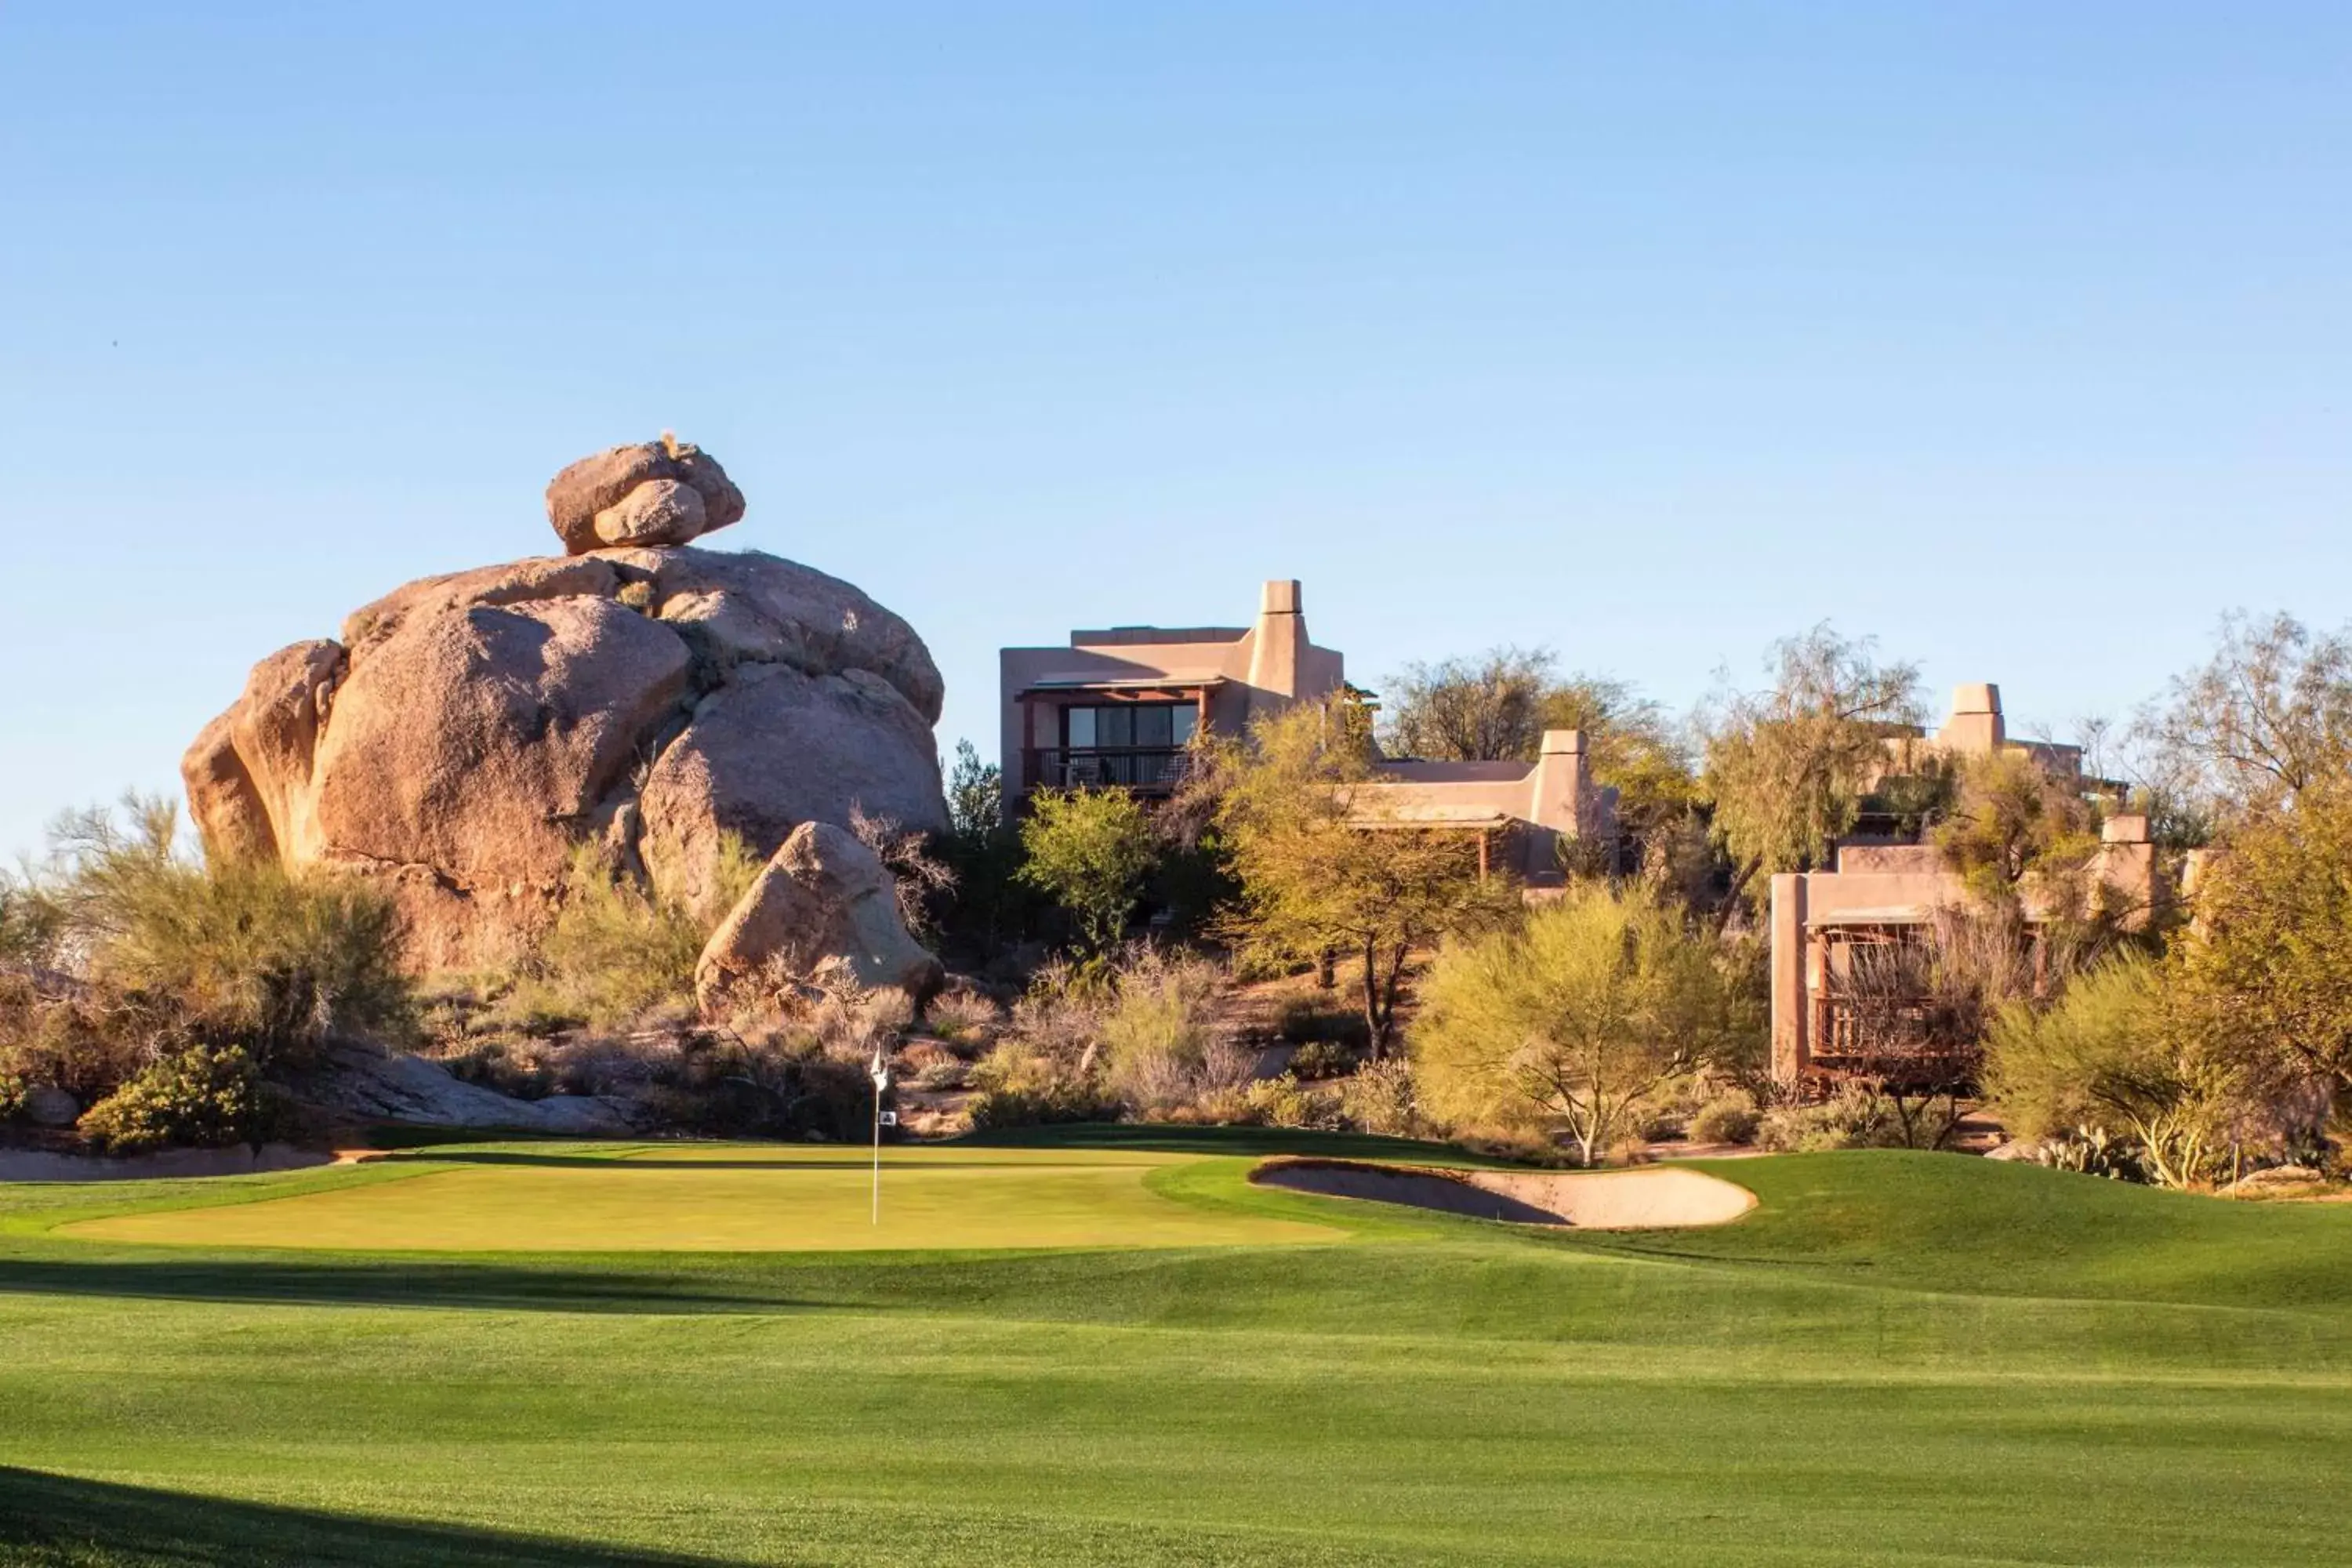 Bed, Property Building in Boulders Resort & Spa Scottsdale, Curio Collection by Hilton